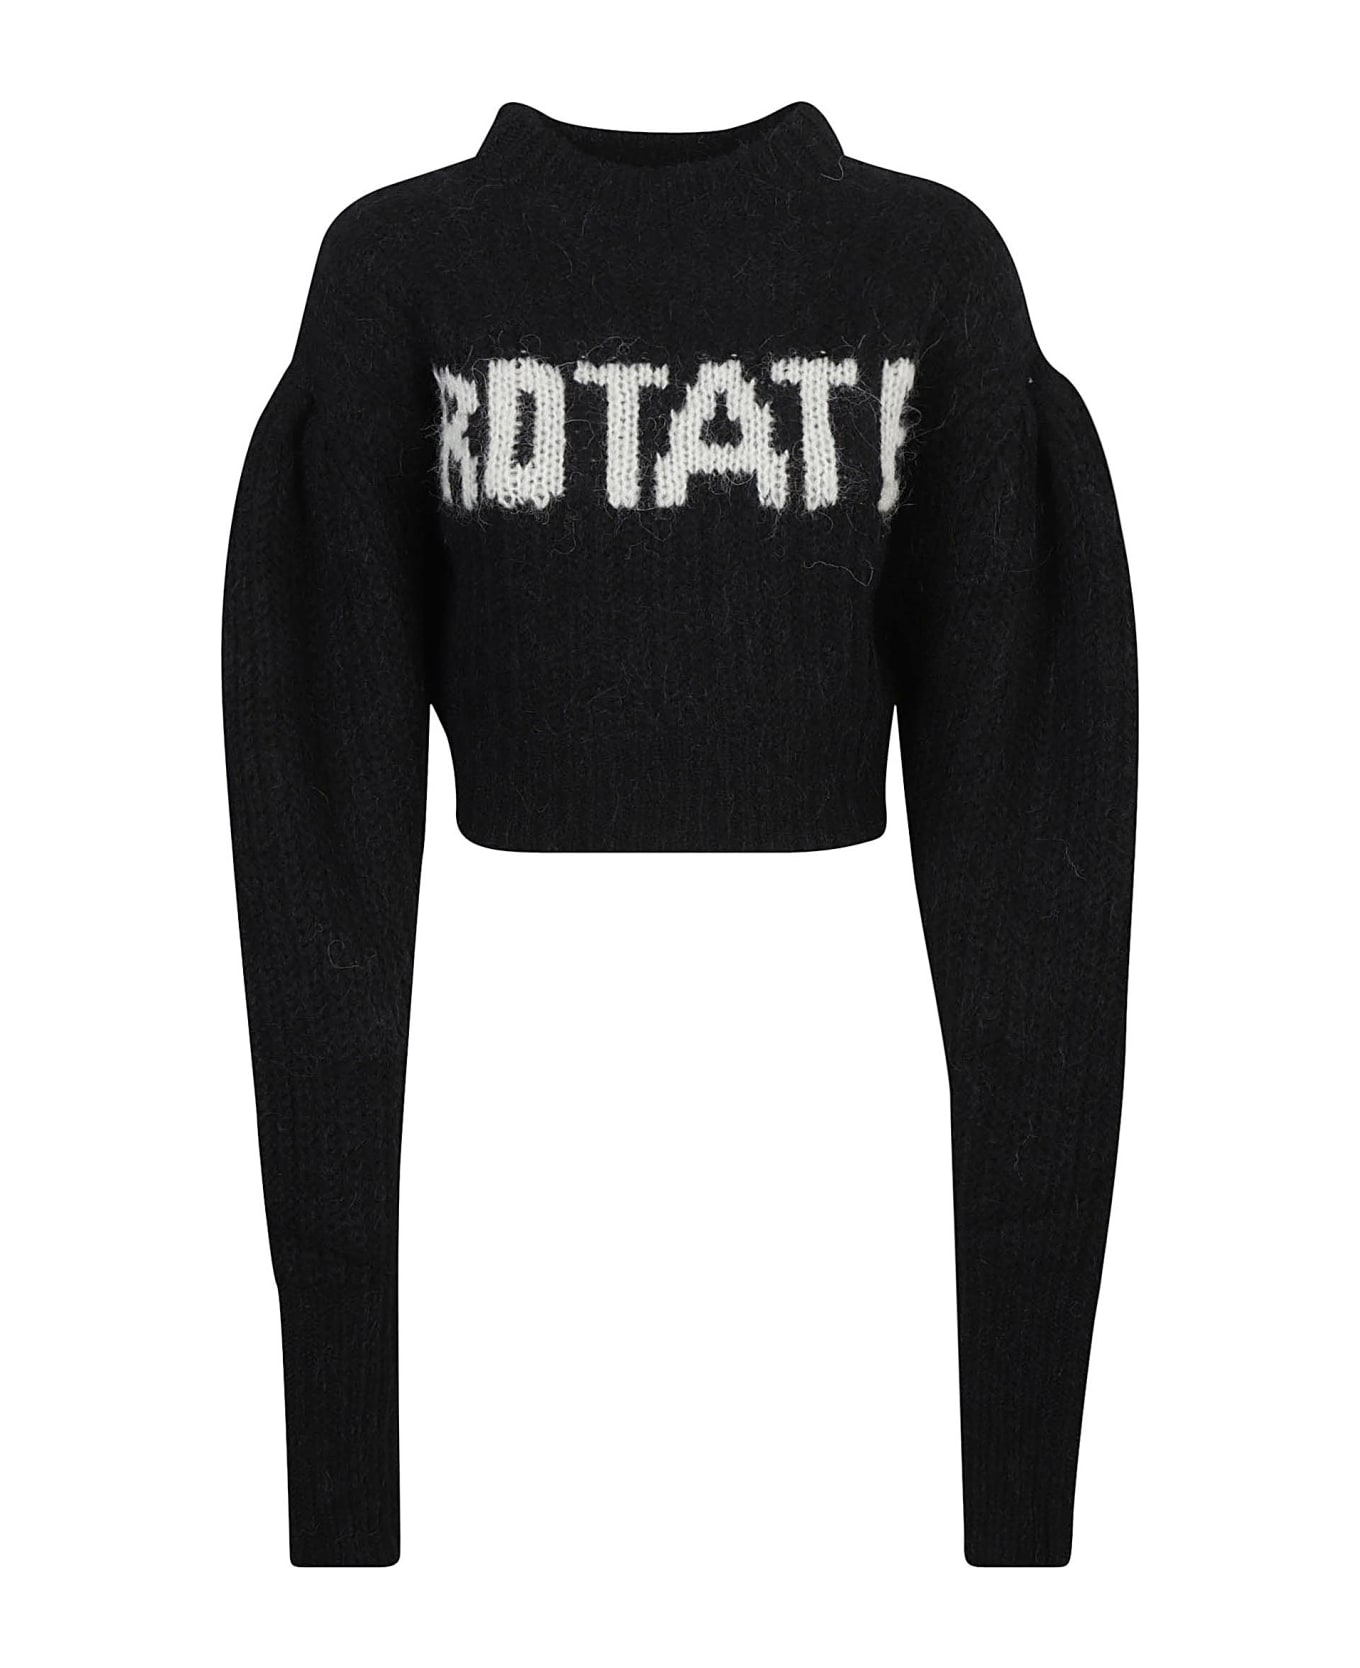 Rotate by Birger Christensen Knitted Sweater - Black